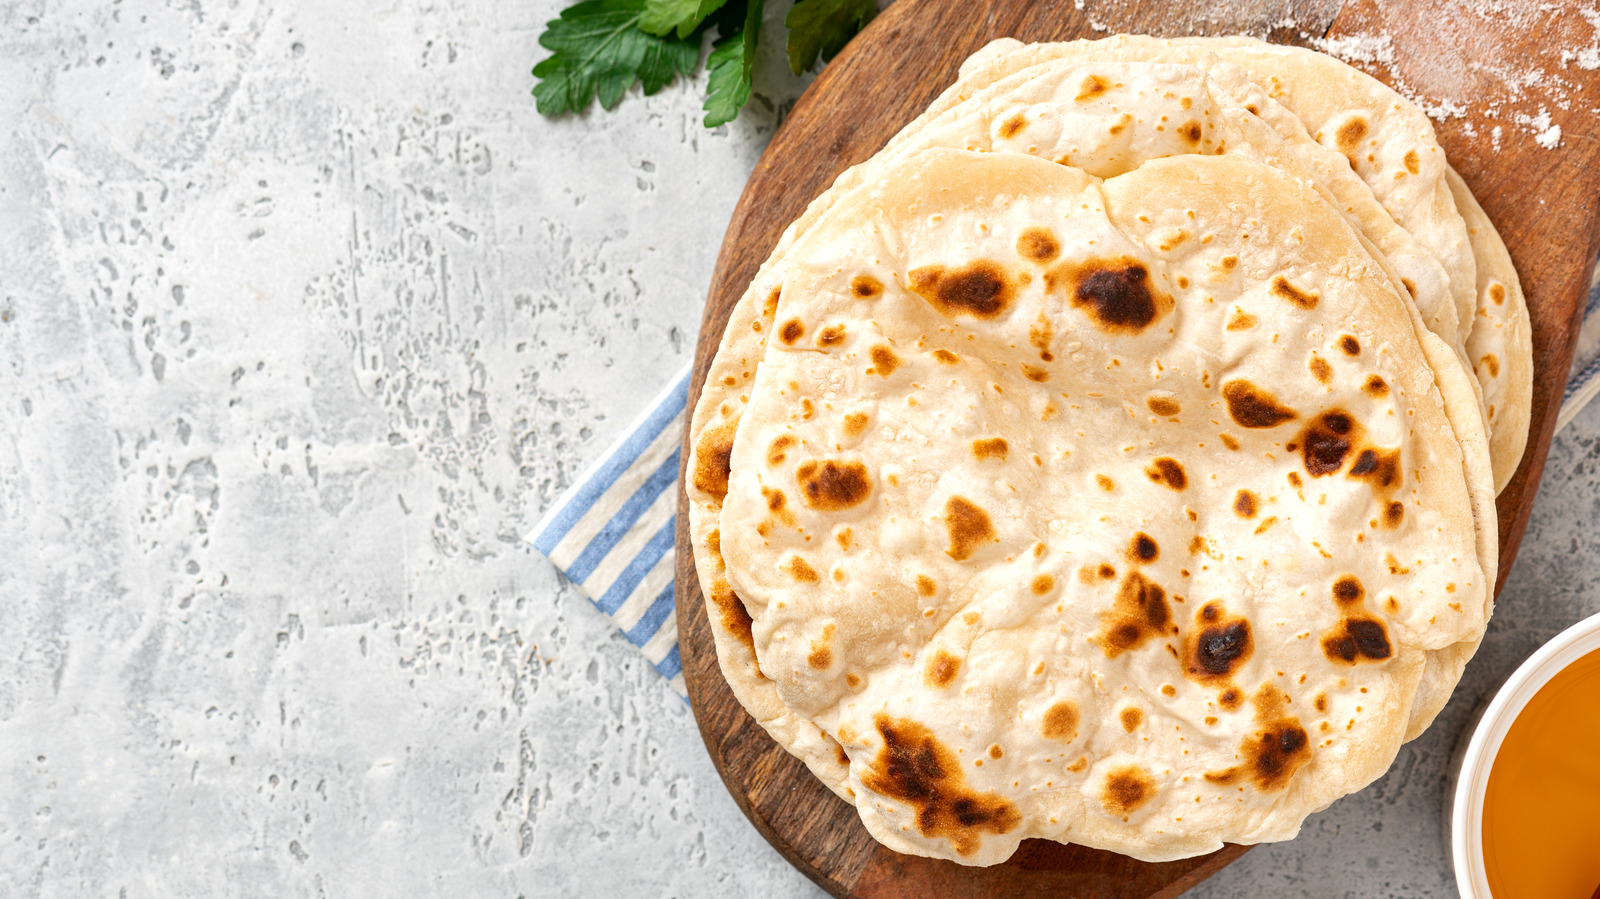 What's The Difference Between Naan And Pita?